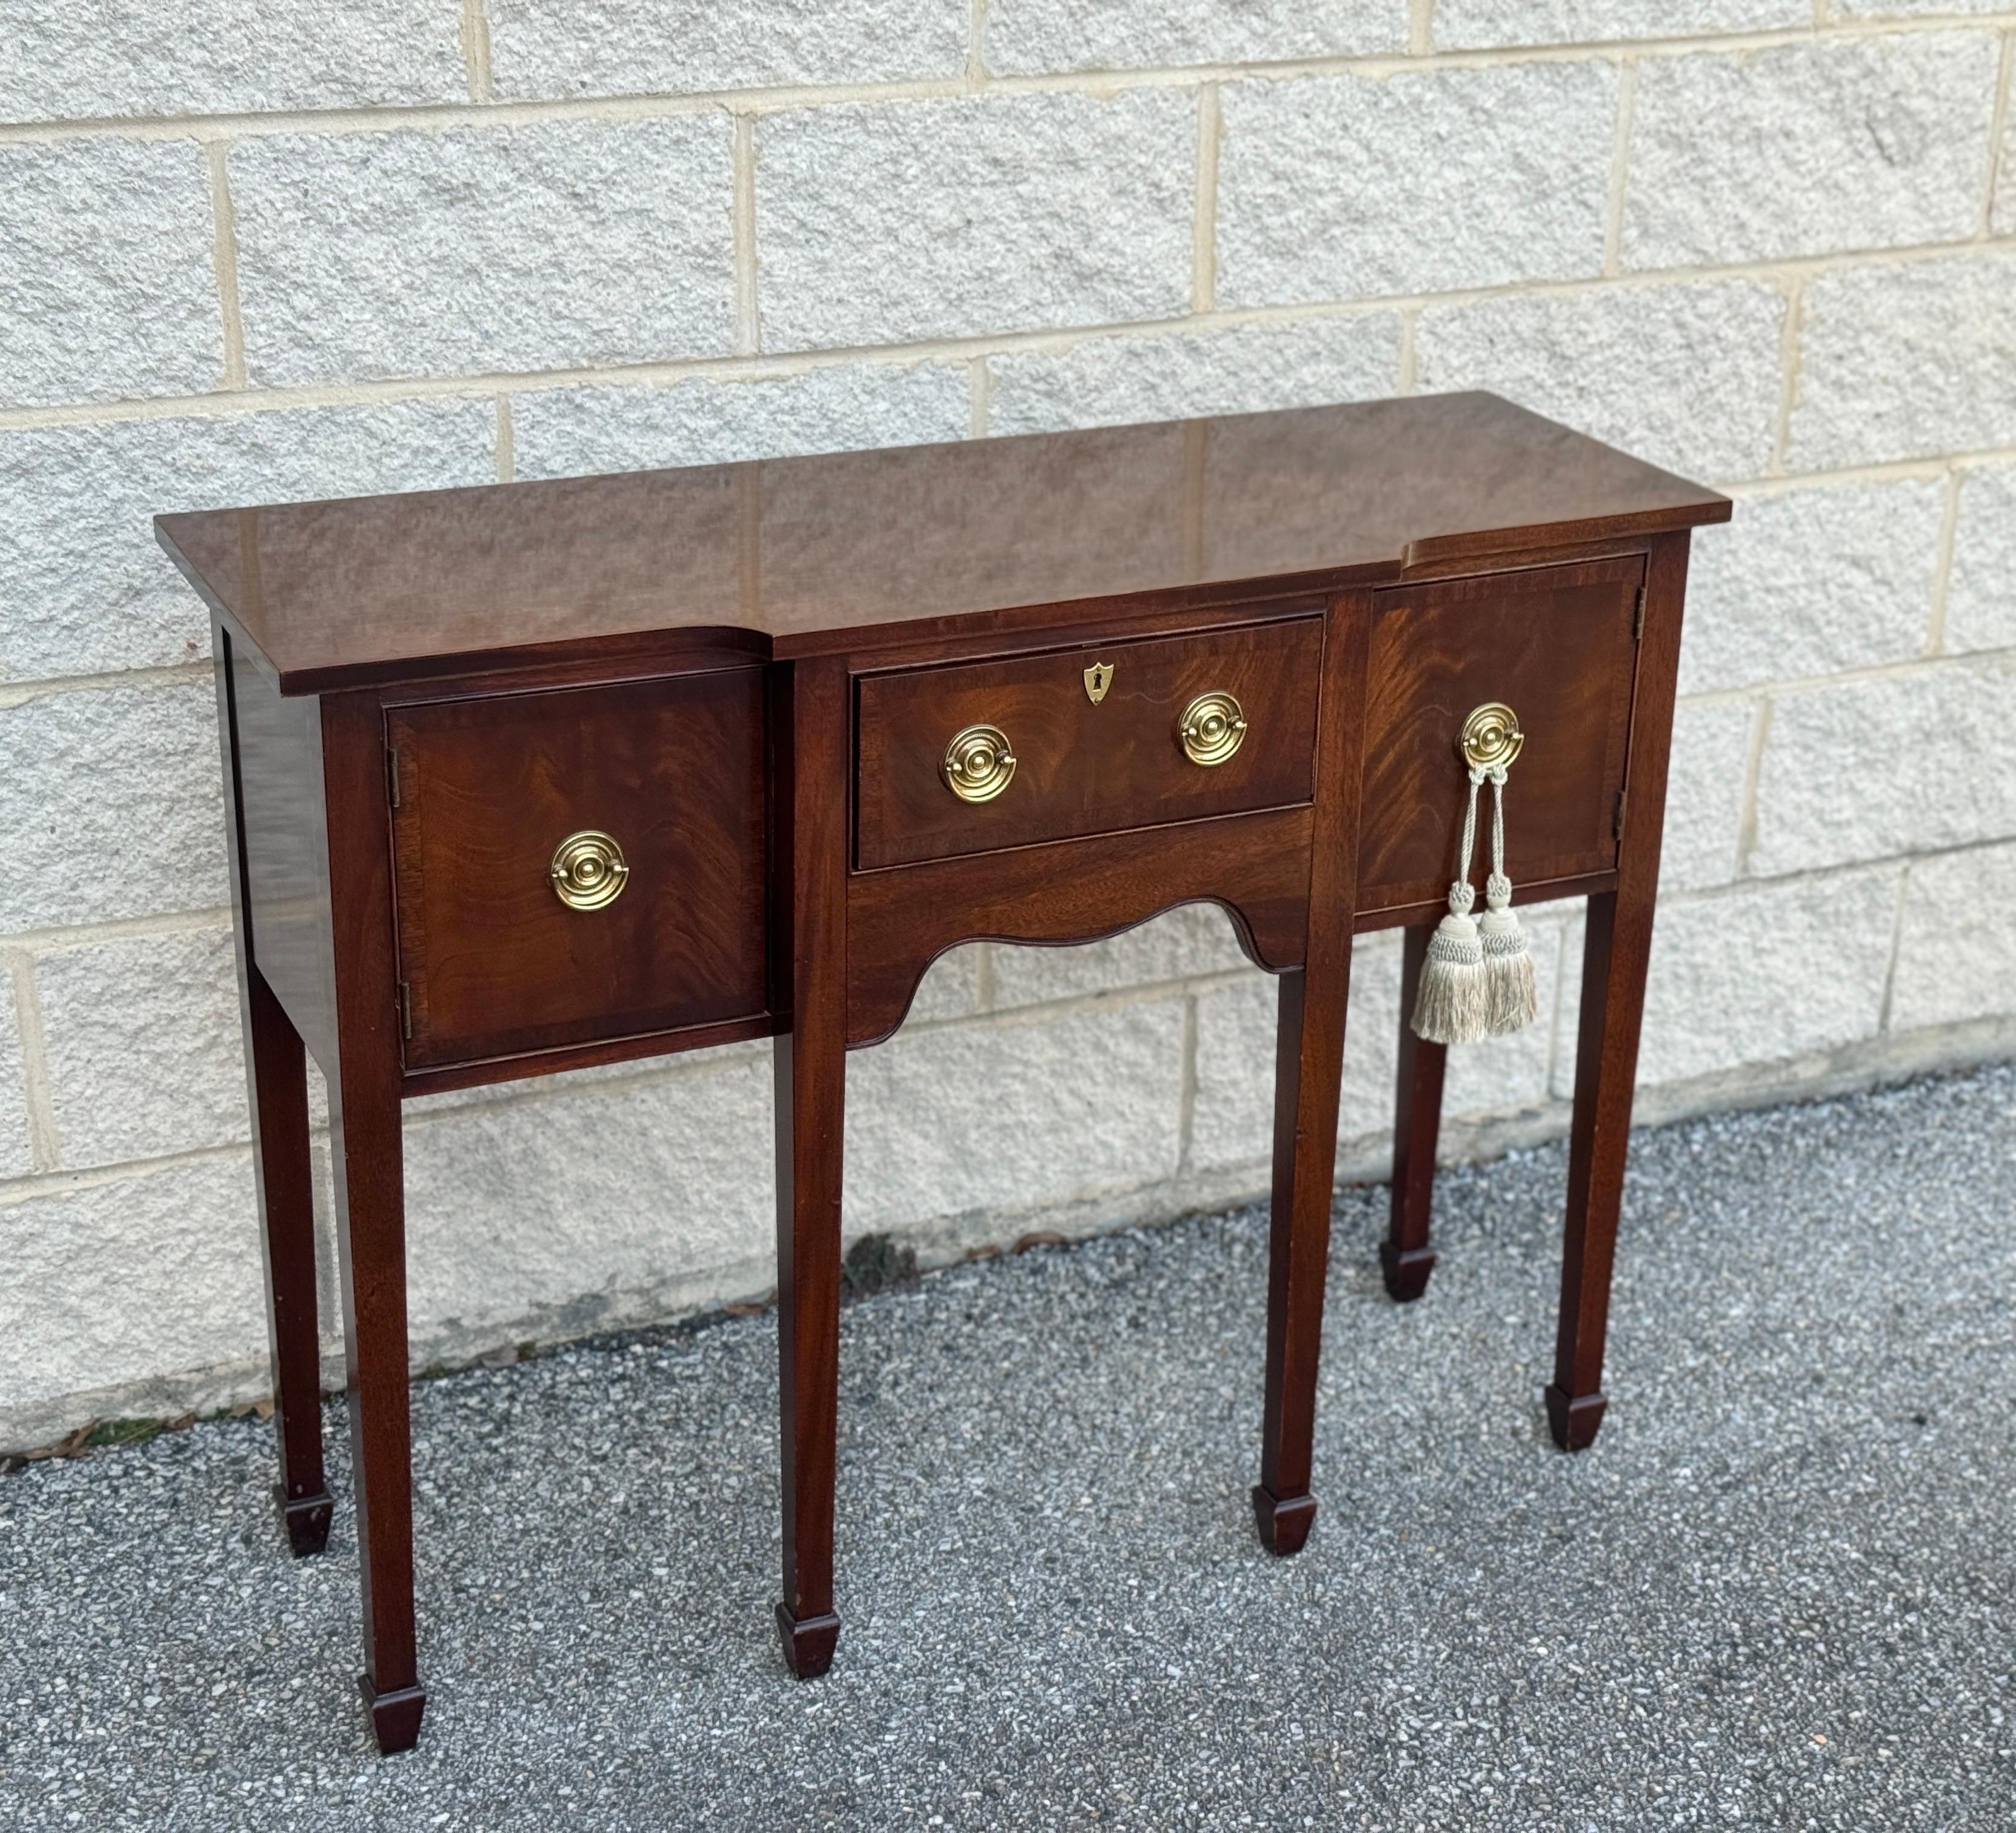 Small console table by Hickory chair company. Features two side compartments with doors and a central drawer. Brass details.